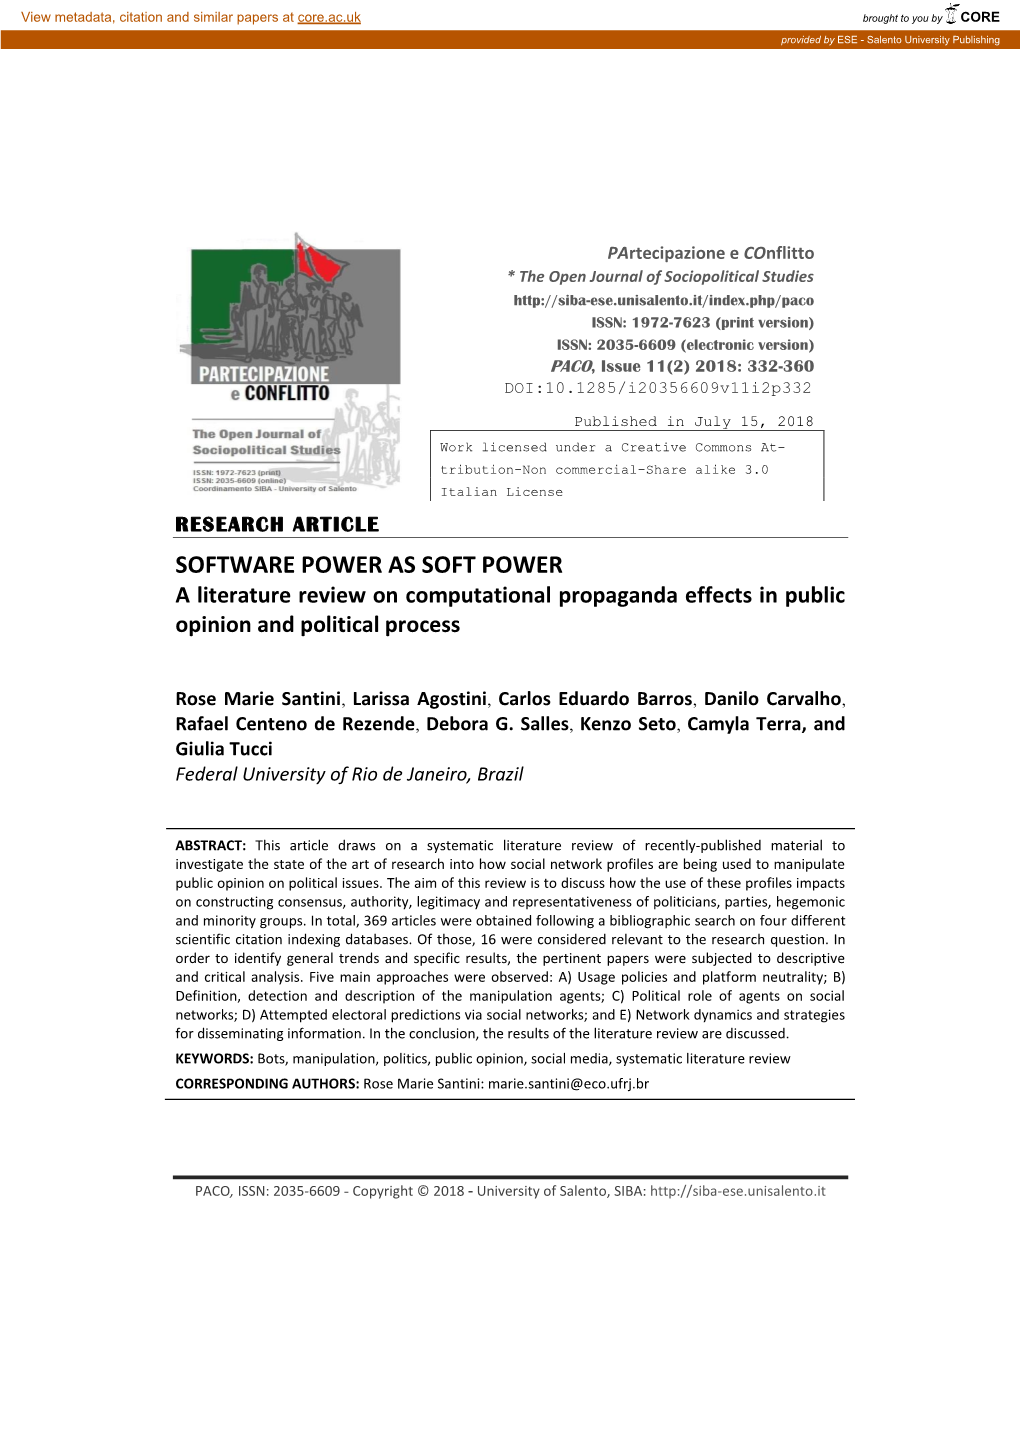 SOFTWARE POWER AS SOFT POWER a Literature Review on Computational Propaganda Effects in Public Opinion and Political Process